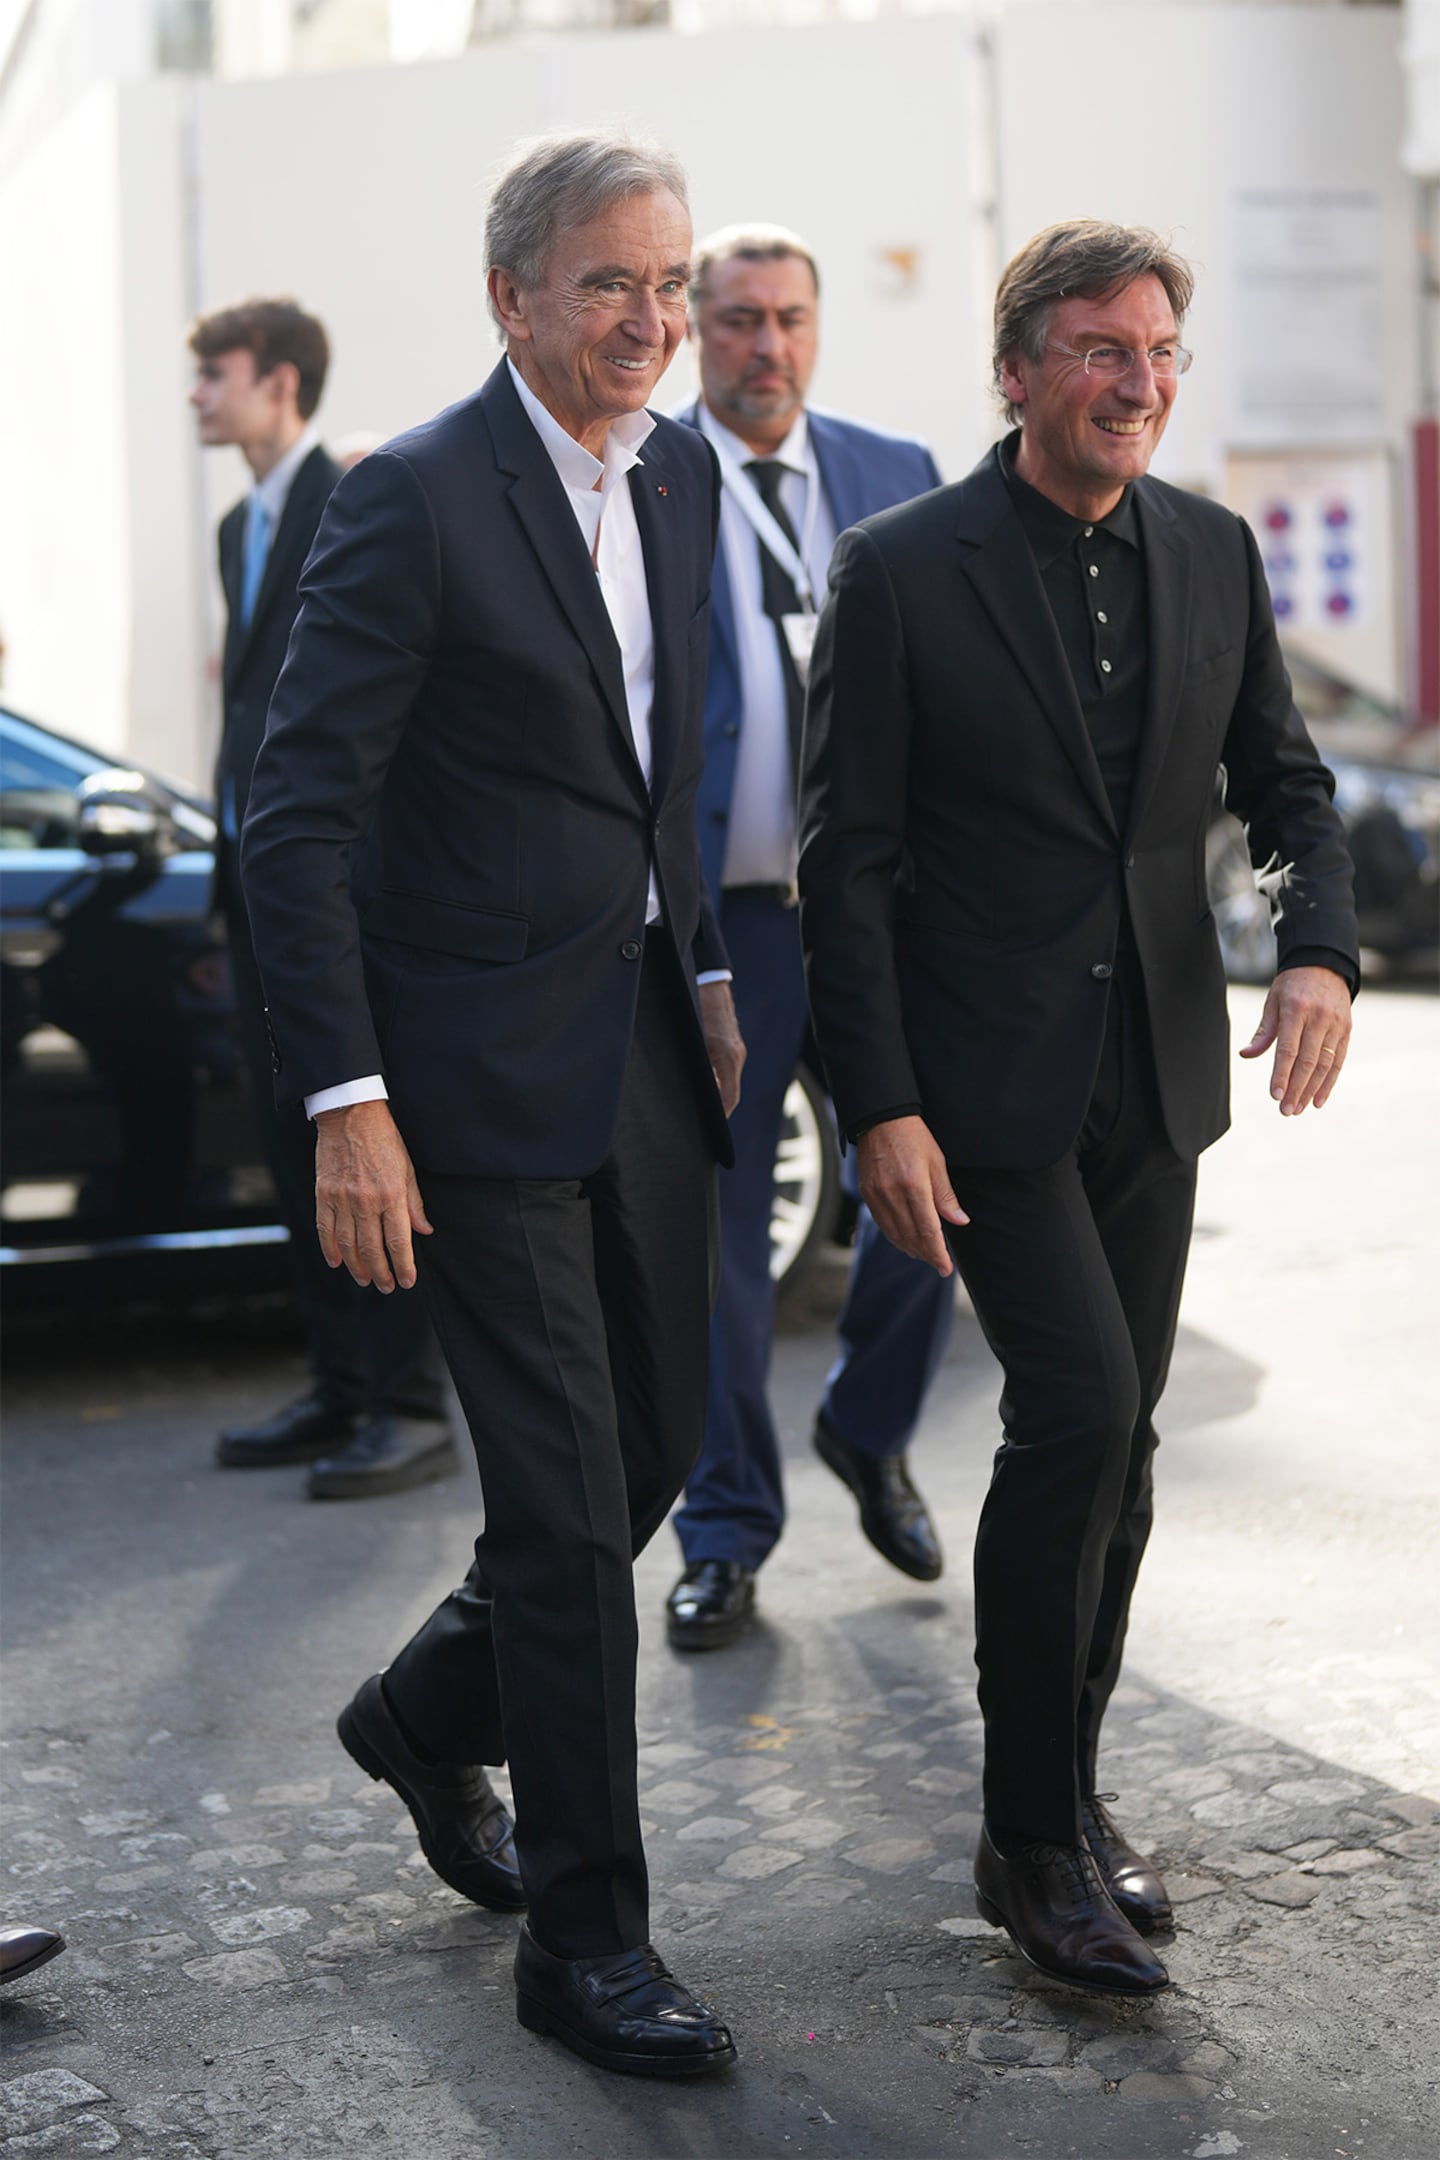 Two men in suits walking down the street